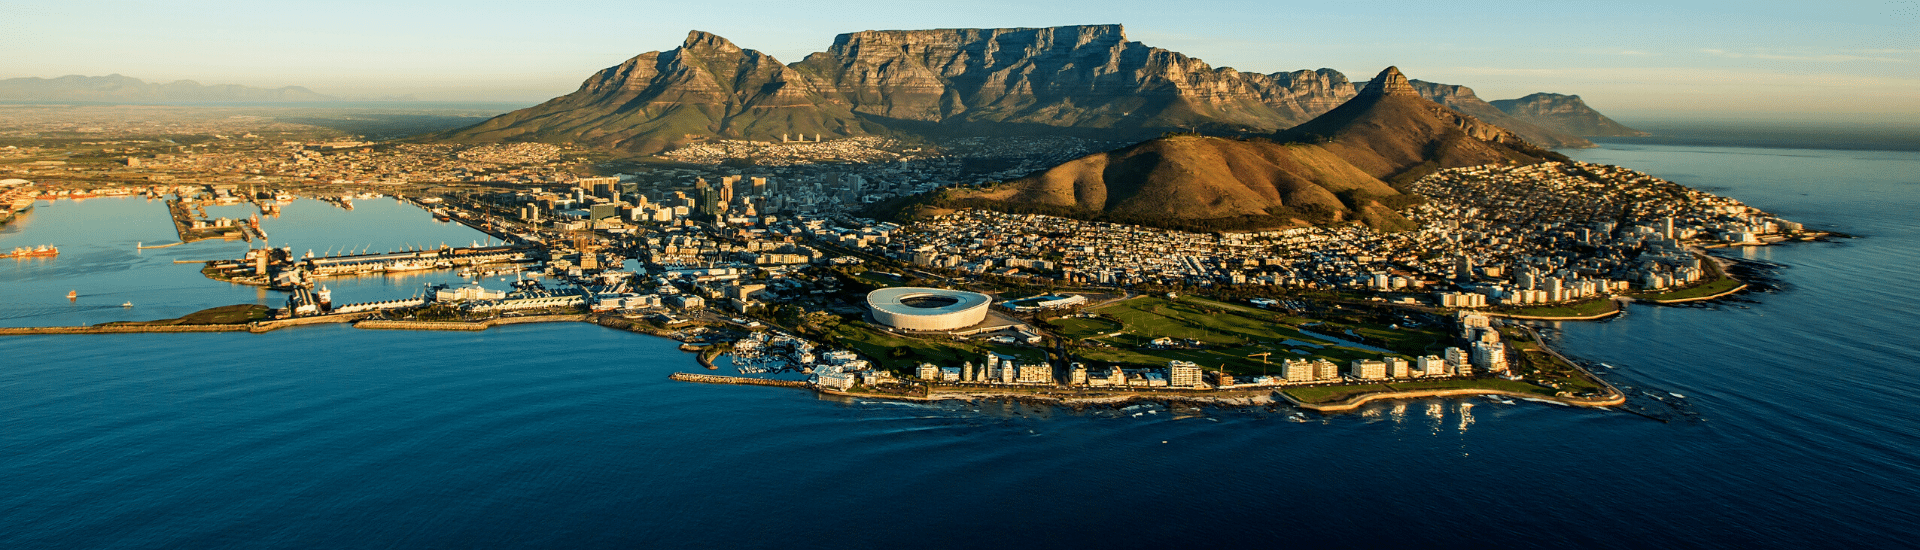 Cape Town South Africa aerial view